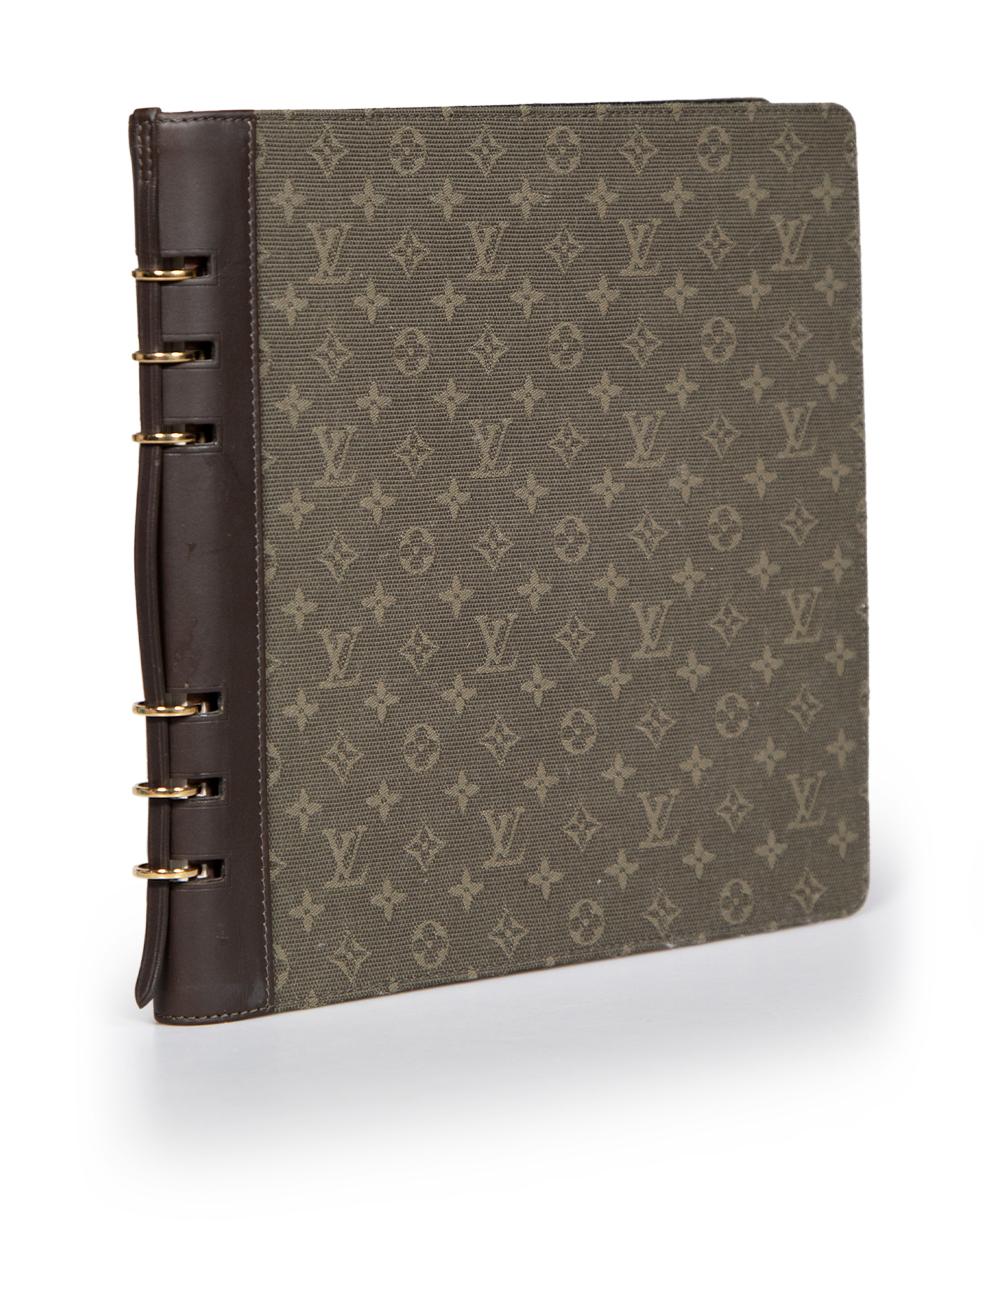 CONDITION is Very good. Minimal wear to the book is evident. Minimal wear to the notebook is seen with a few small scratches on the leather detailing on the side of this used Louis Vuitton designer resale item.
 
 
 
 Details
 
 
 Khaki
 
 Canvas
 
